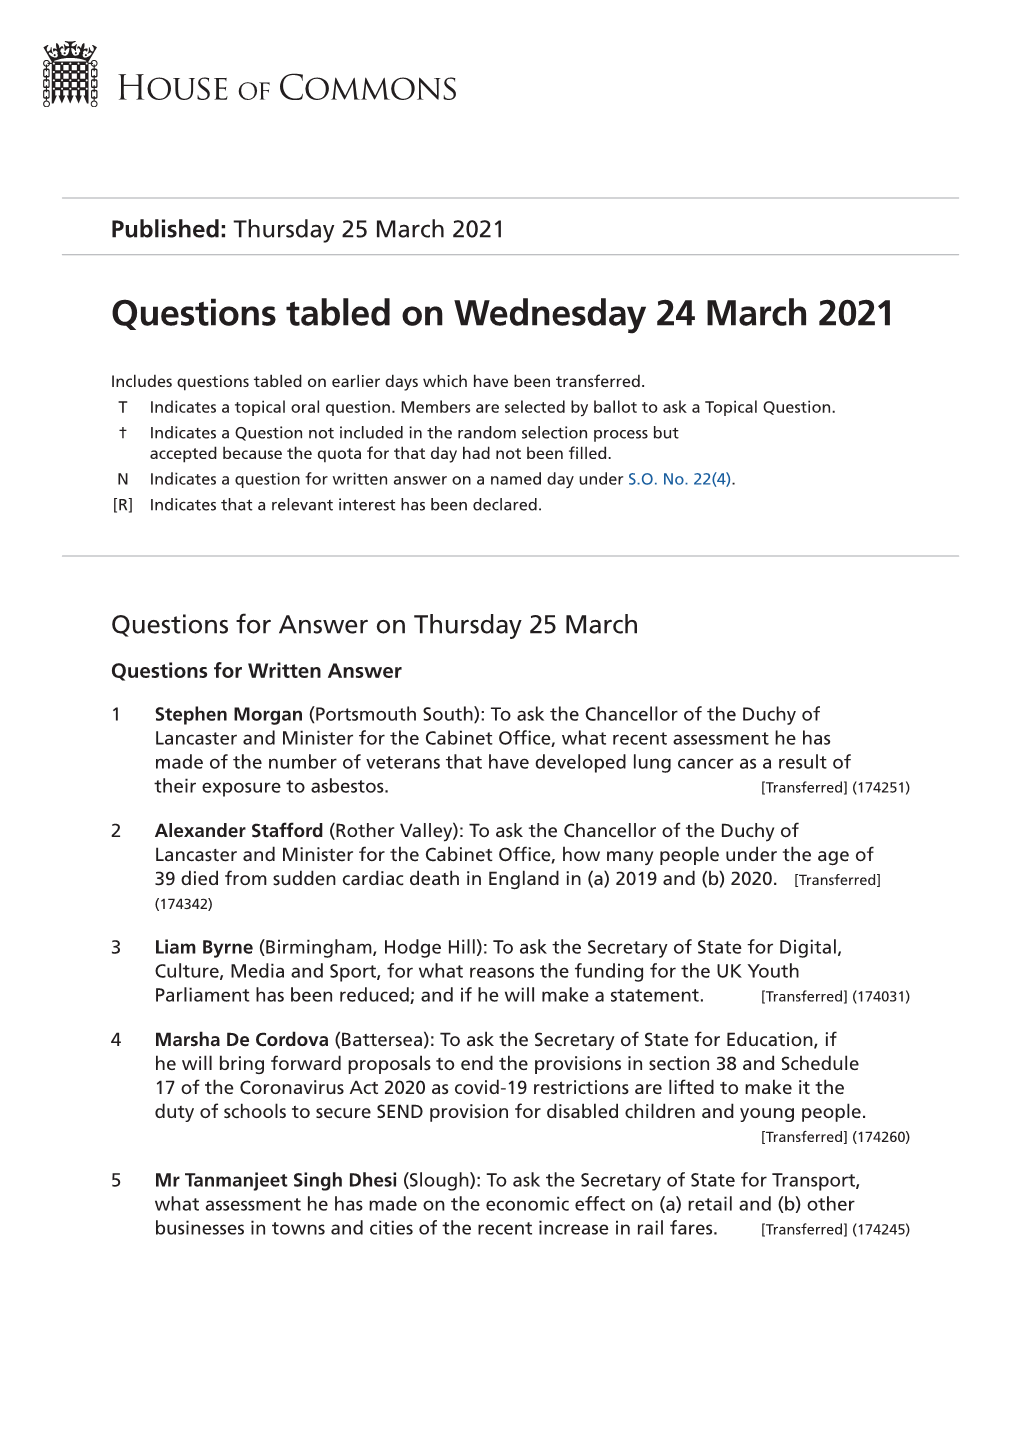 Questions Tabled on Wednesday 24 March 2021